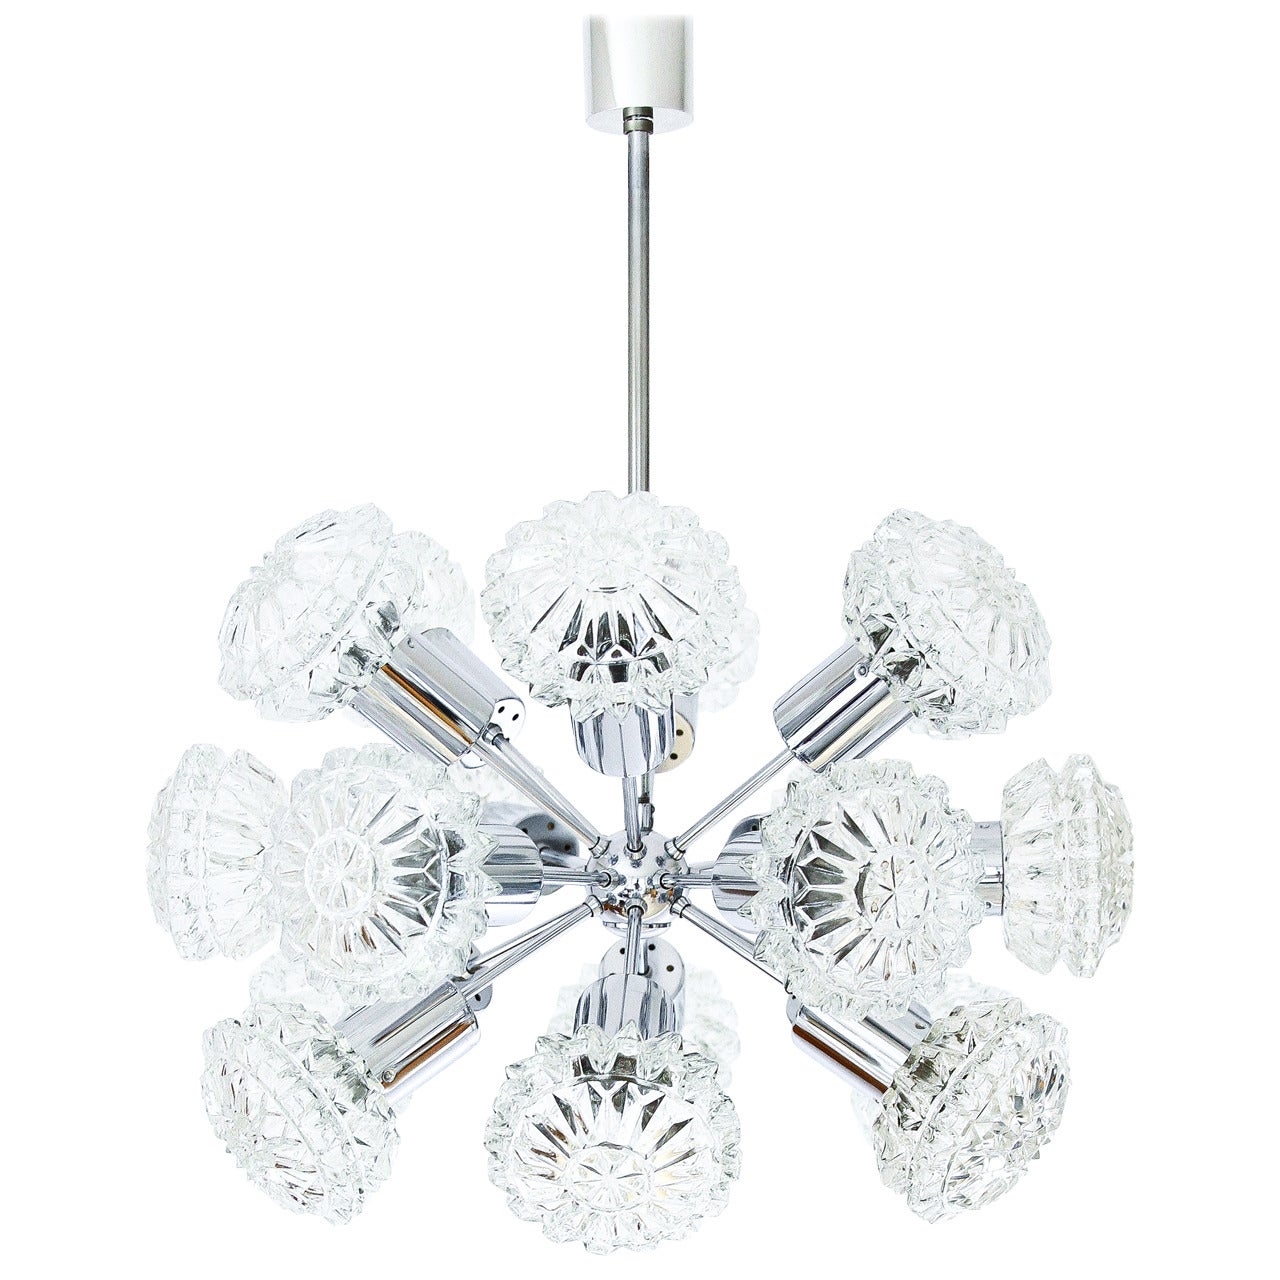 Mid-Century Modern Sputnik Chandelier, Textured Clear Glass and Chrome, 1970s